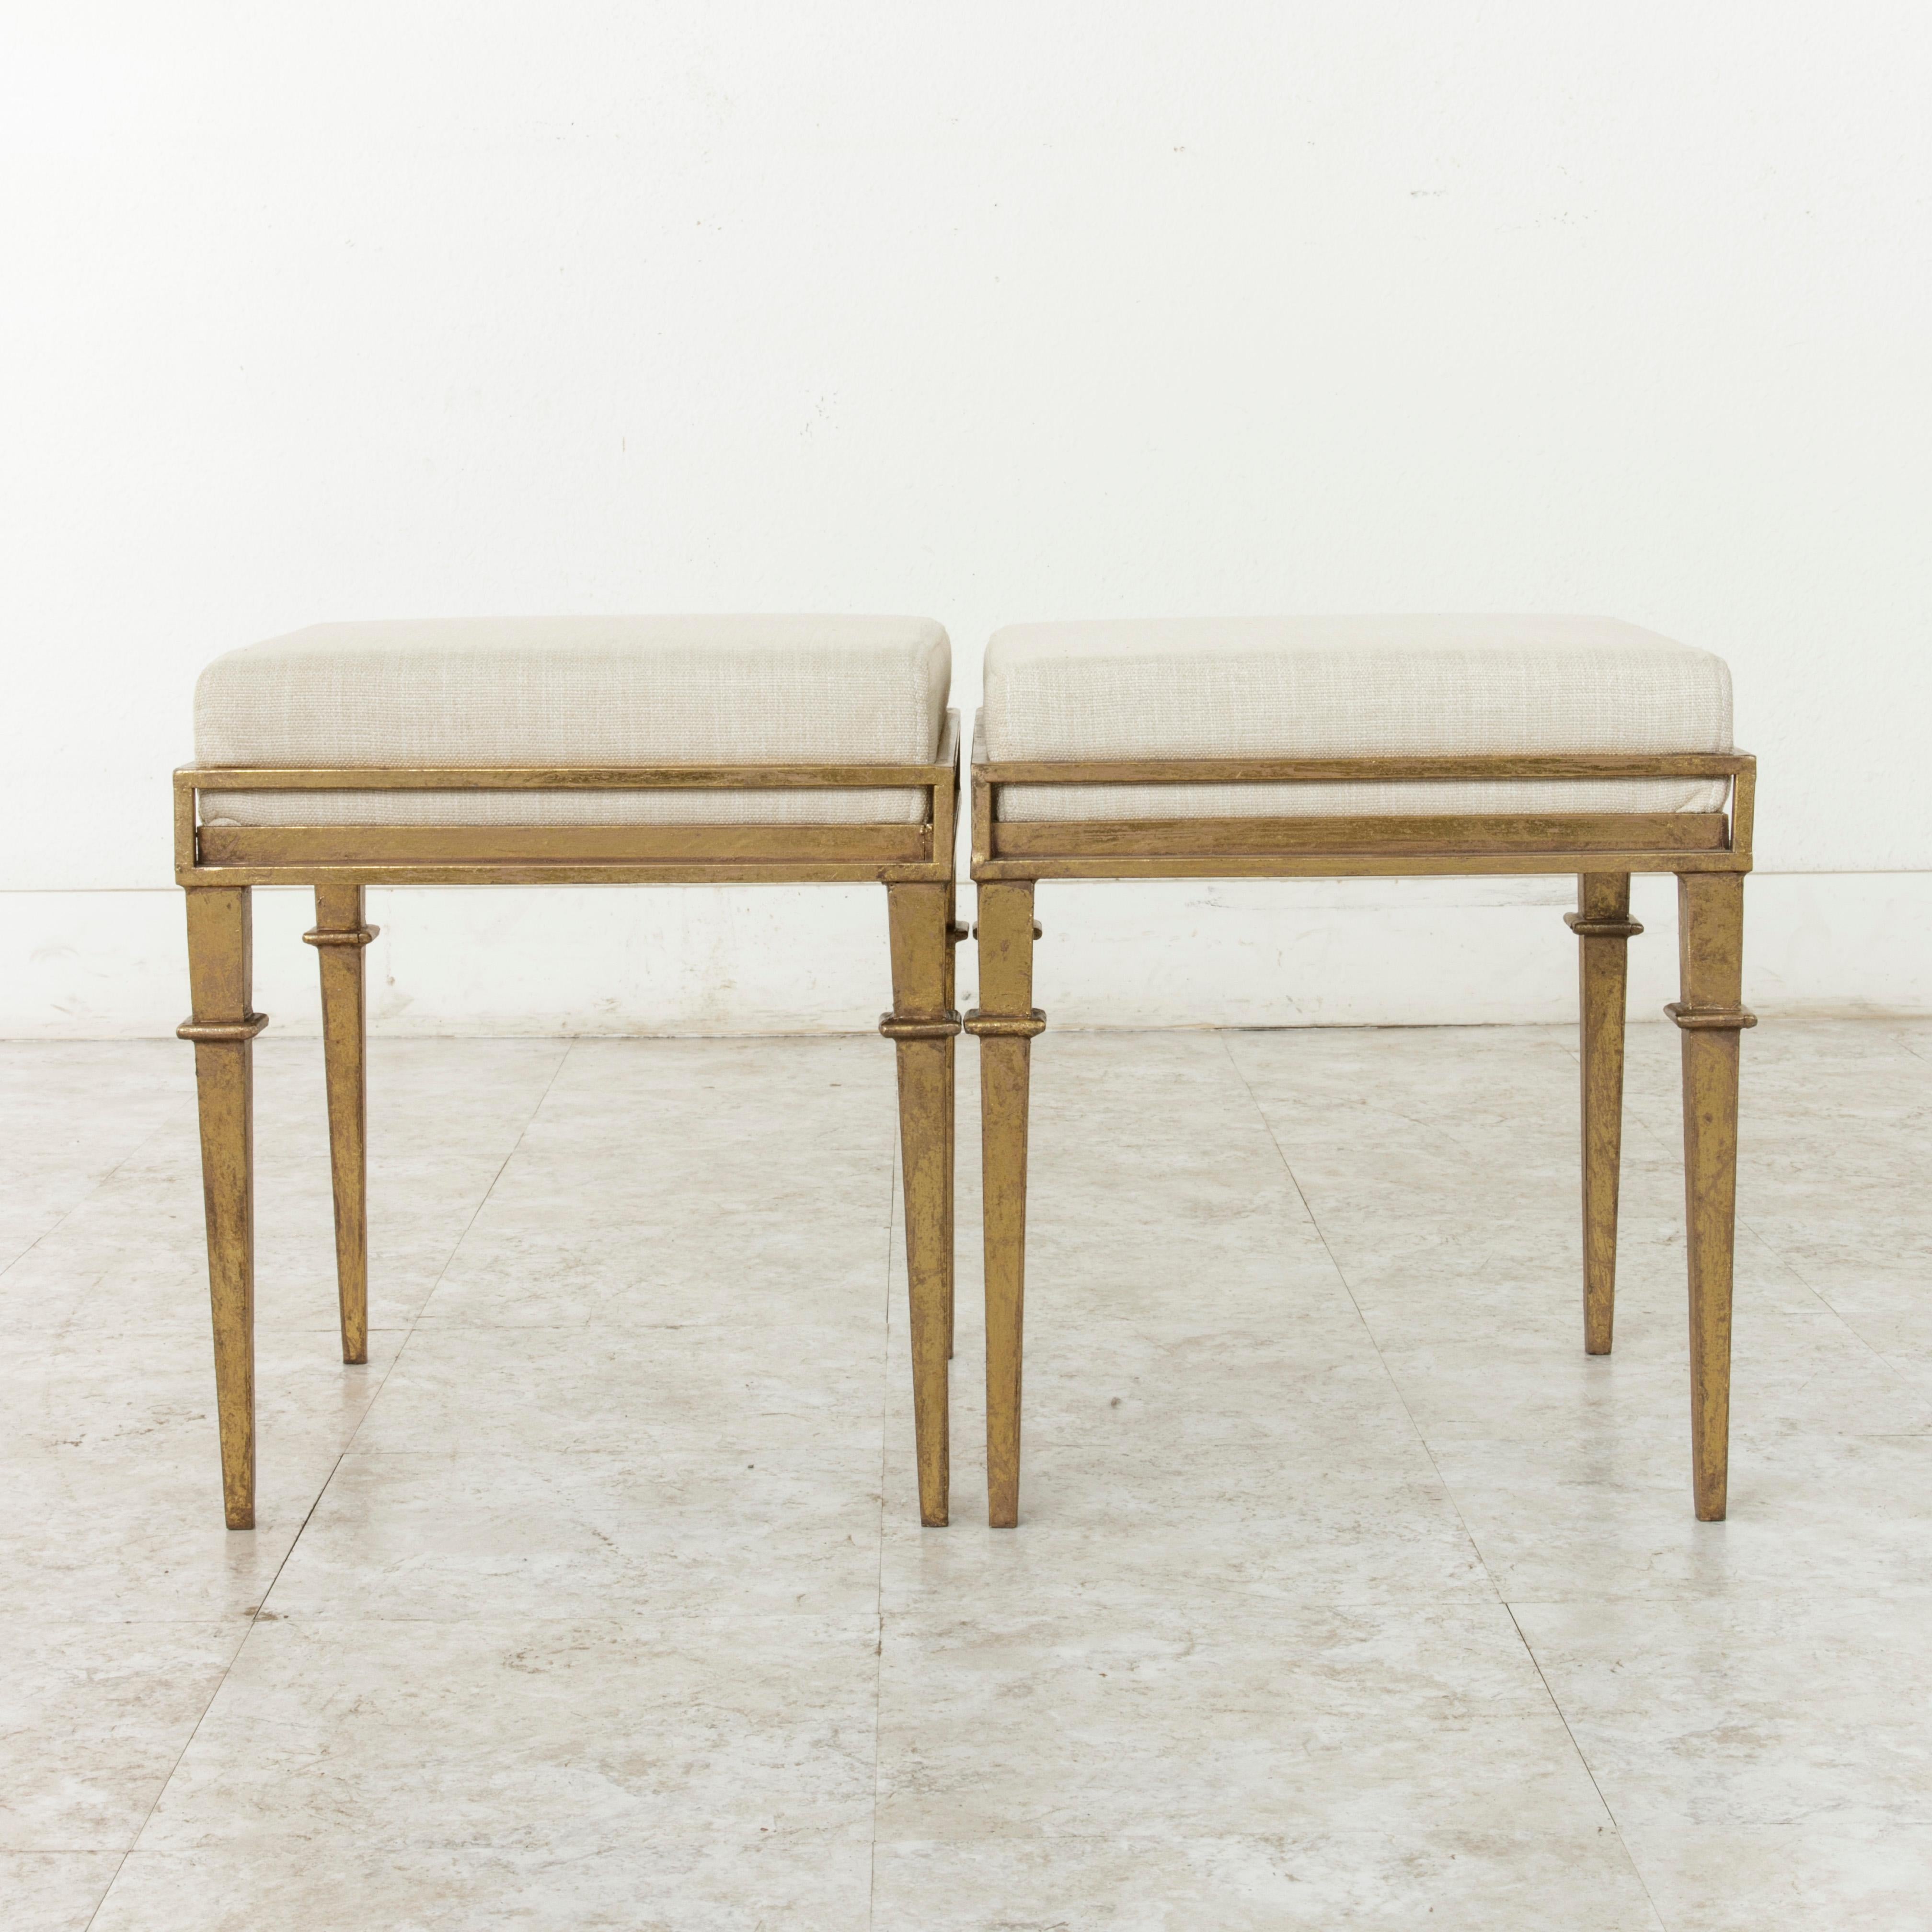 Contemporary Pair of French Gilded Iron Banquettes or Benches with Linen Upholstered Cushions